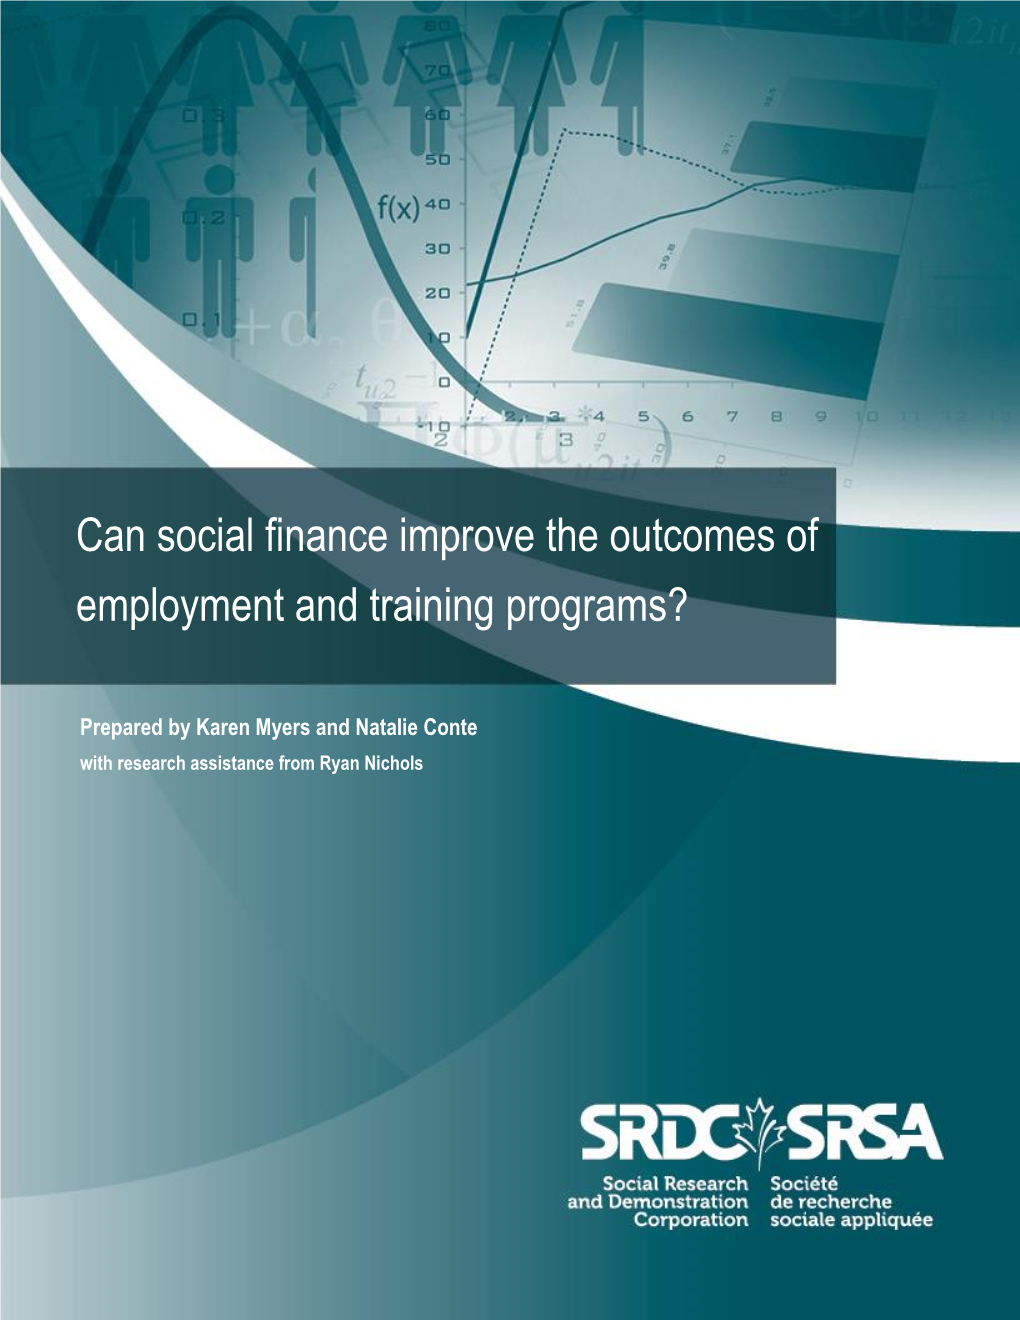 Can Social Finance Improve the Outcomes of Employment and Training Programs?